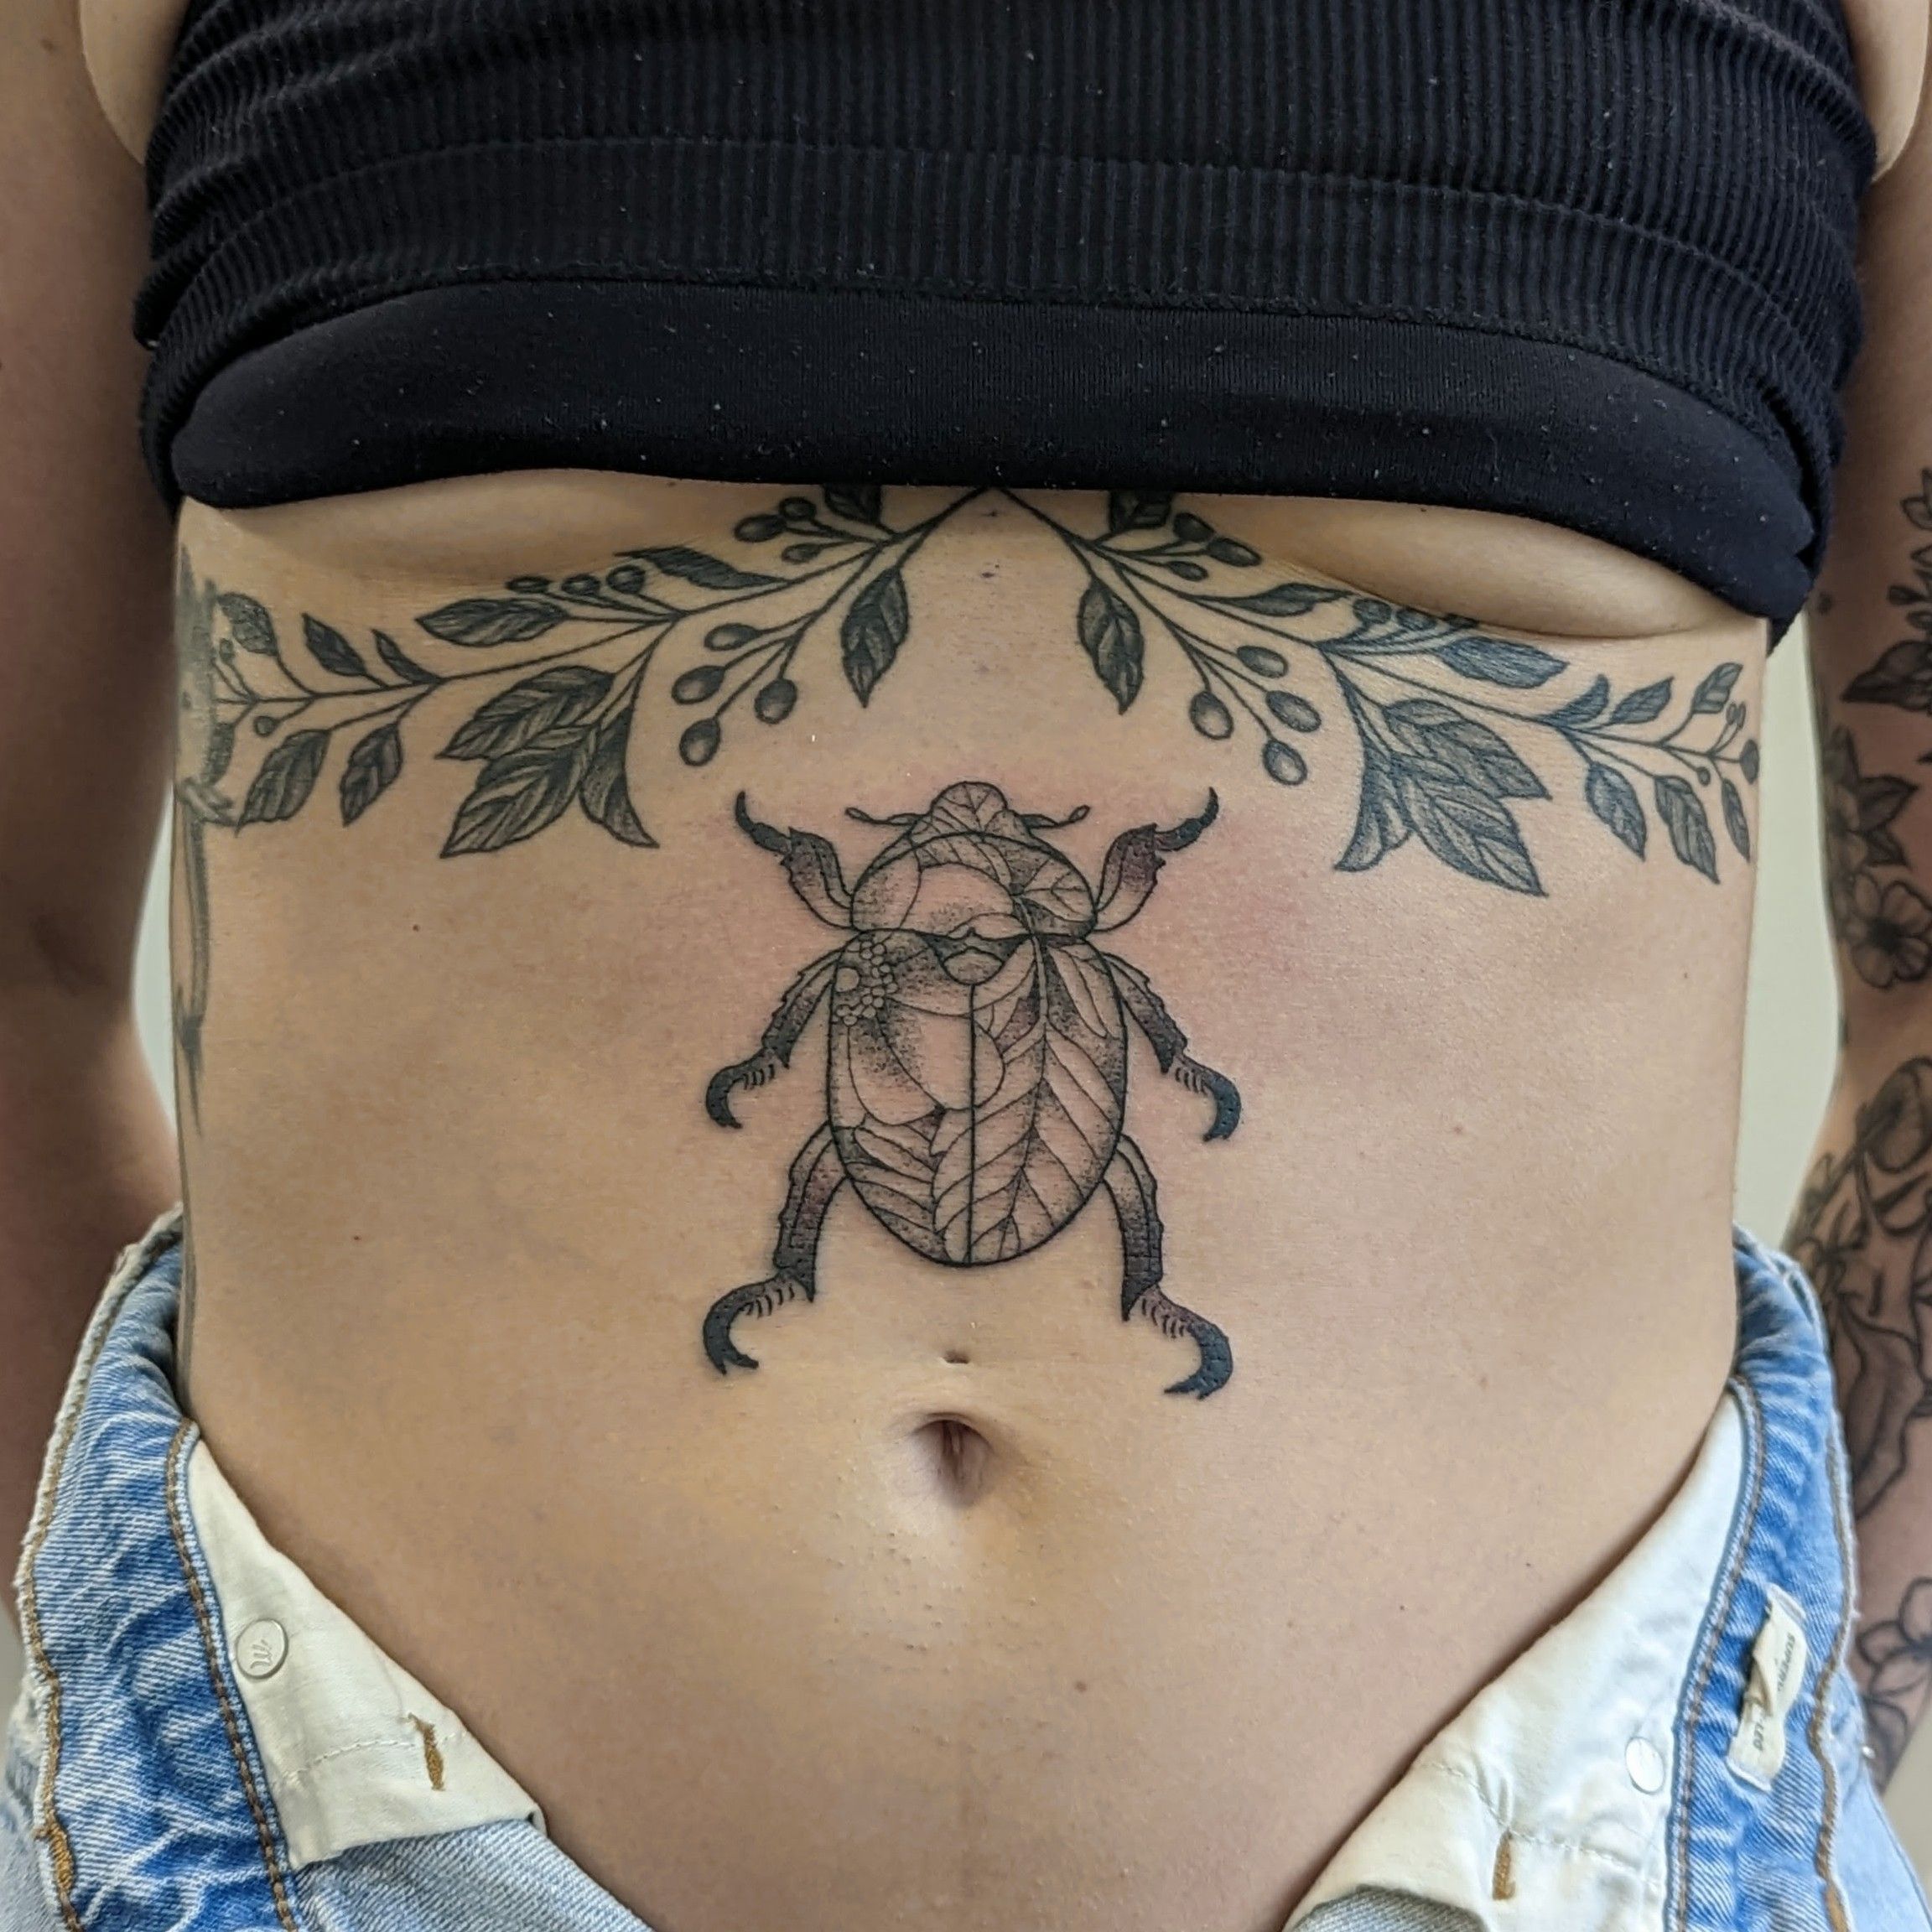 Tattoo uploaded by Tasha Terror • Started this tummy blaster! More to come!  • Tattoodo